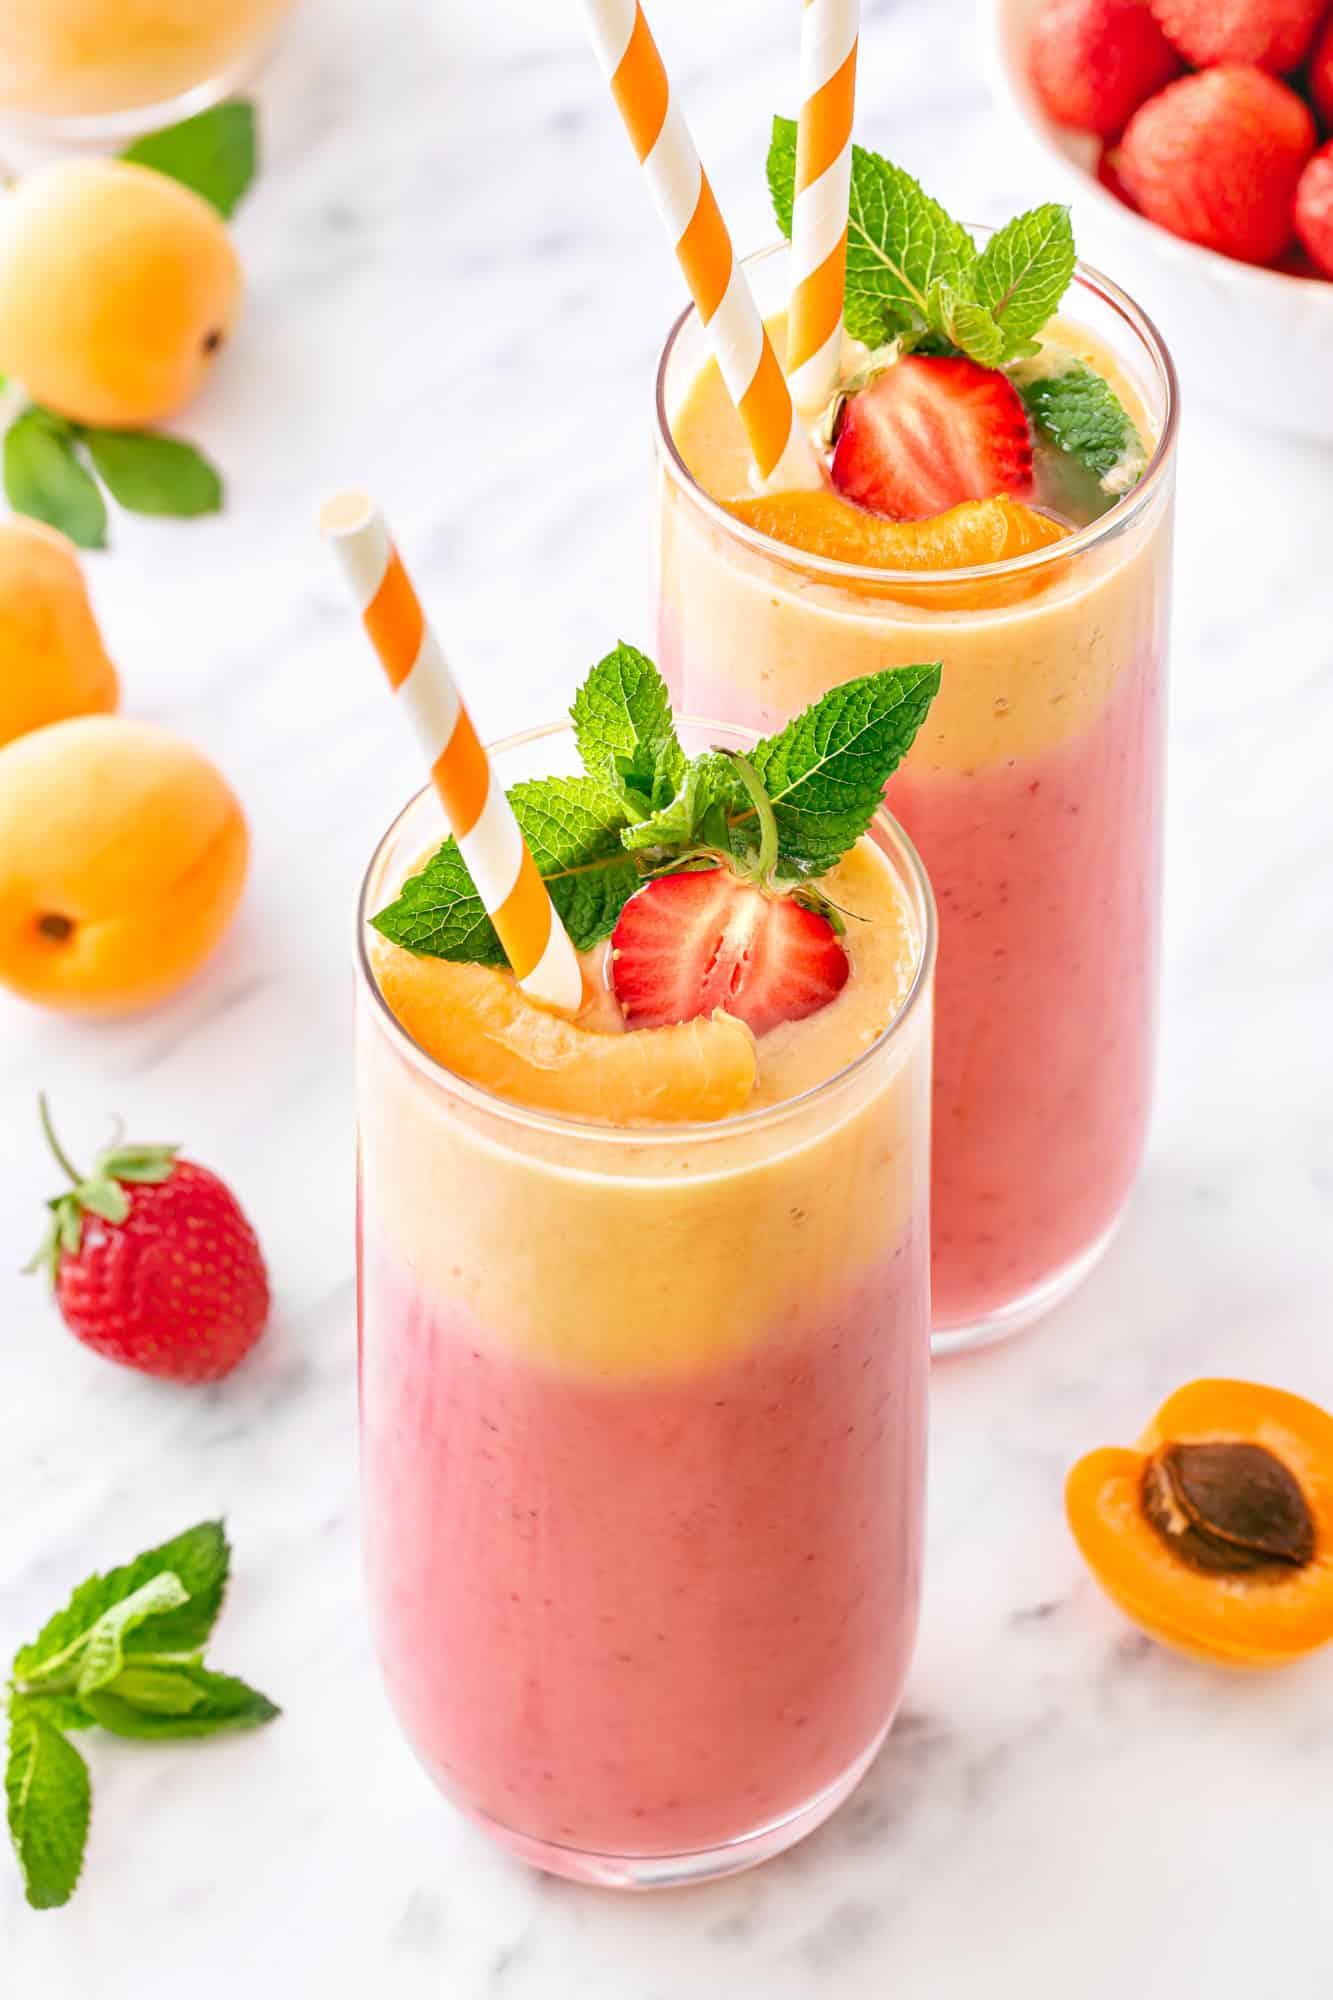 Apricot smoothie in a tall clear glass with a striped straw and a strawberry 